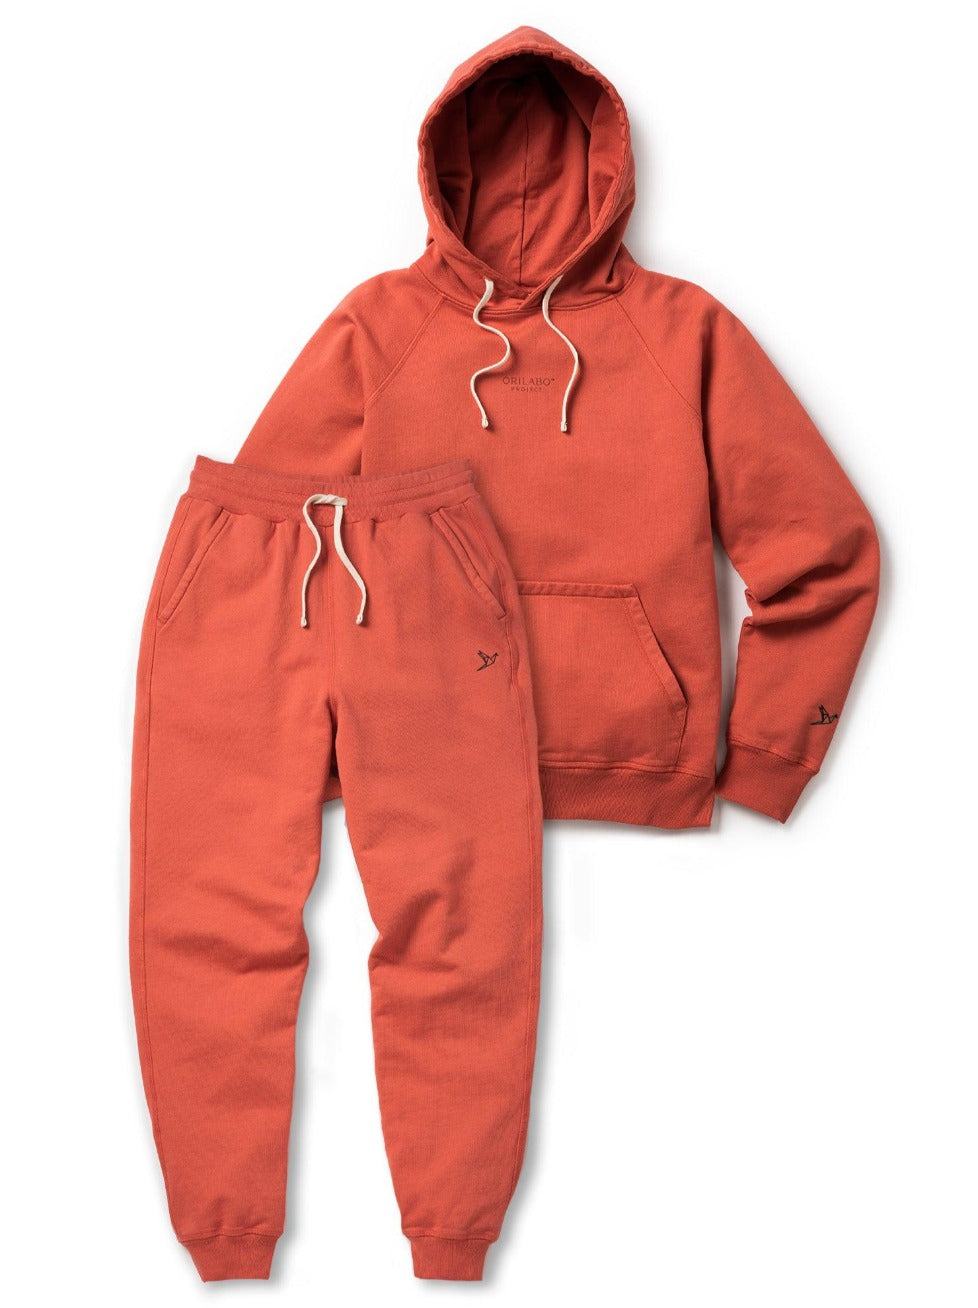 Women's Comfy Set - Coral - ORILABO Project